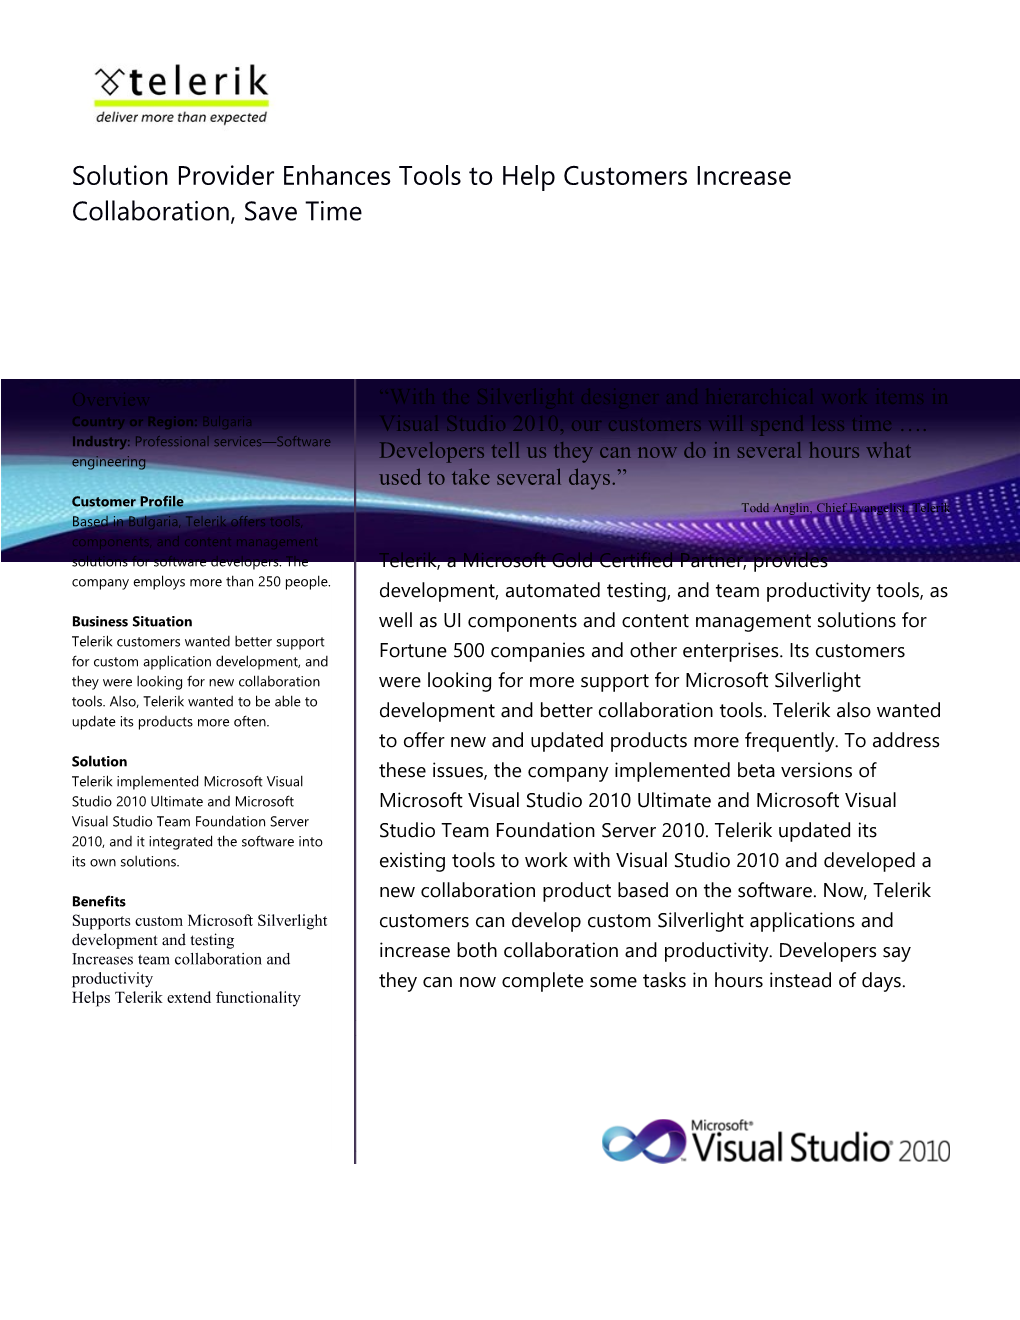 Solution Provider Enhances Tools to Help Customers Increase Collaboration, Save Time